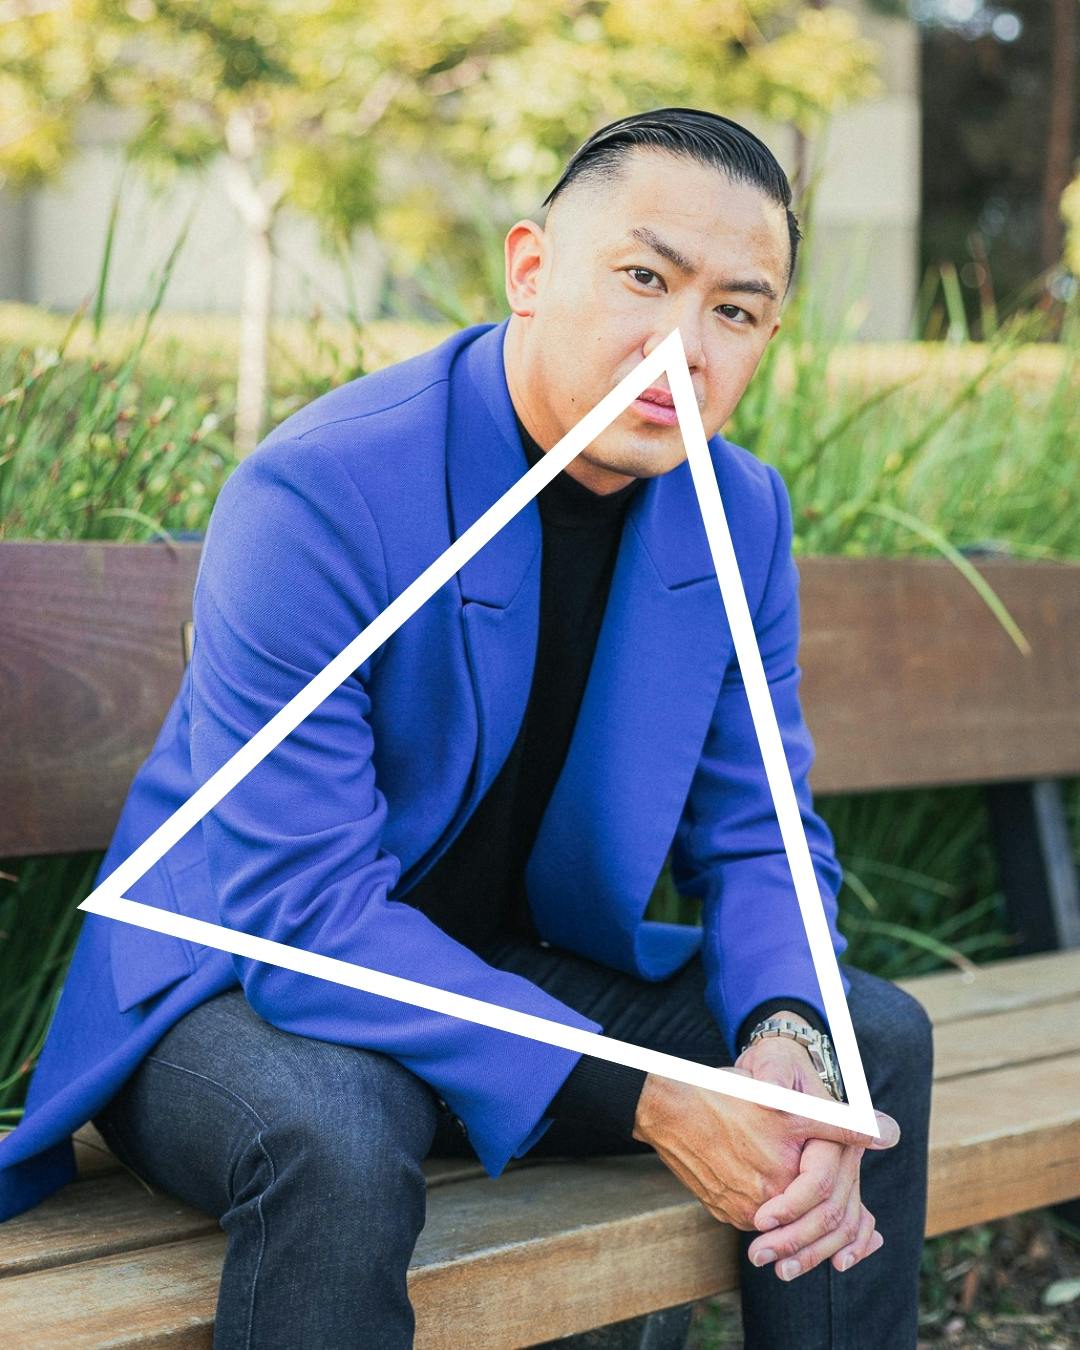 Man in blue suit sitting on bench in a triangle pose.